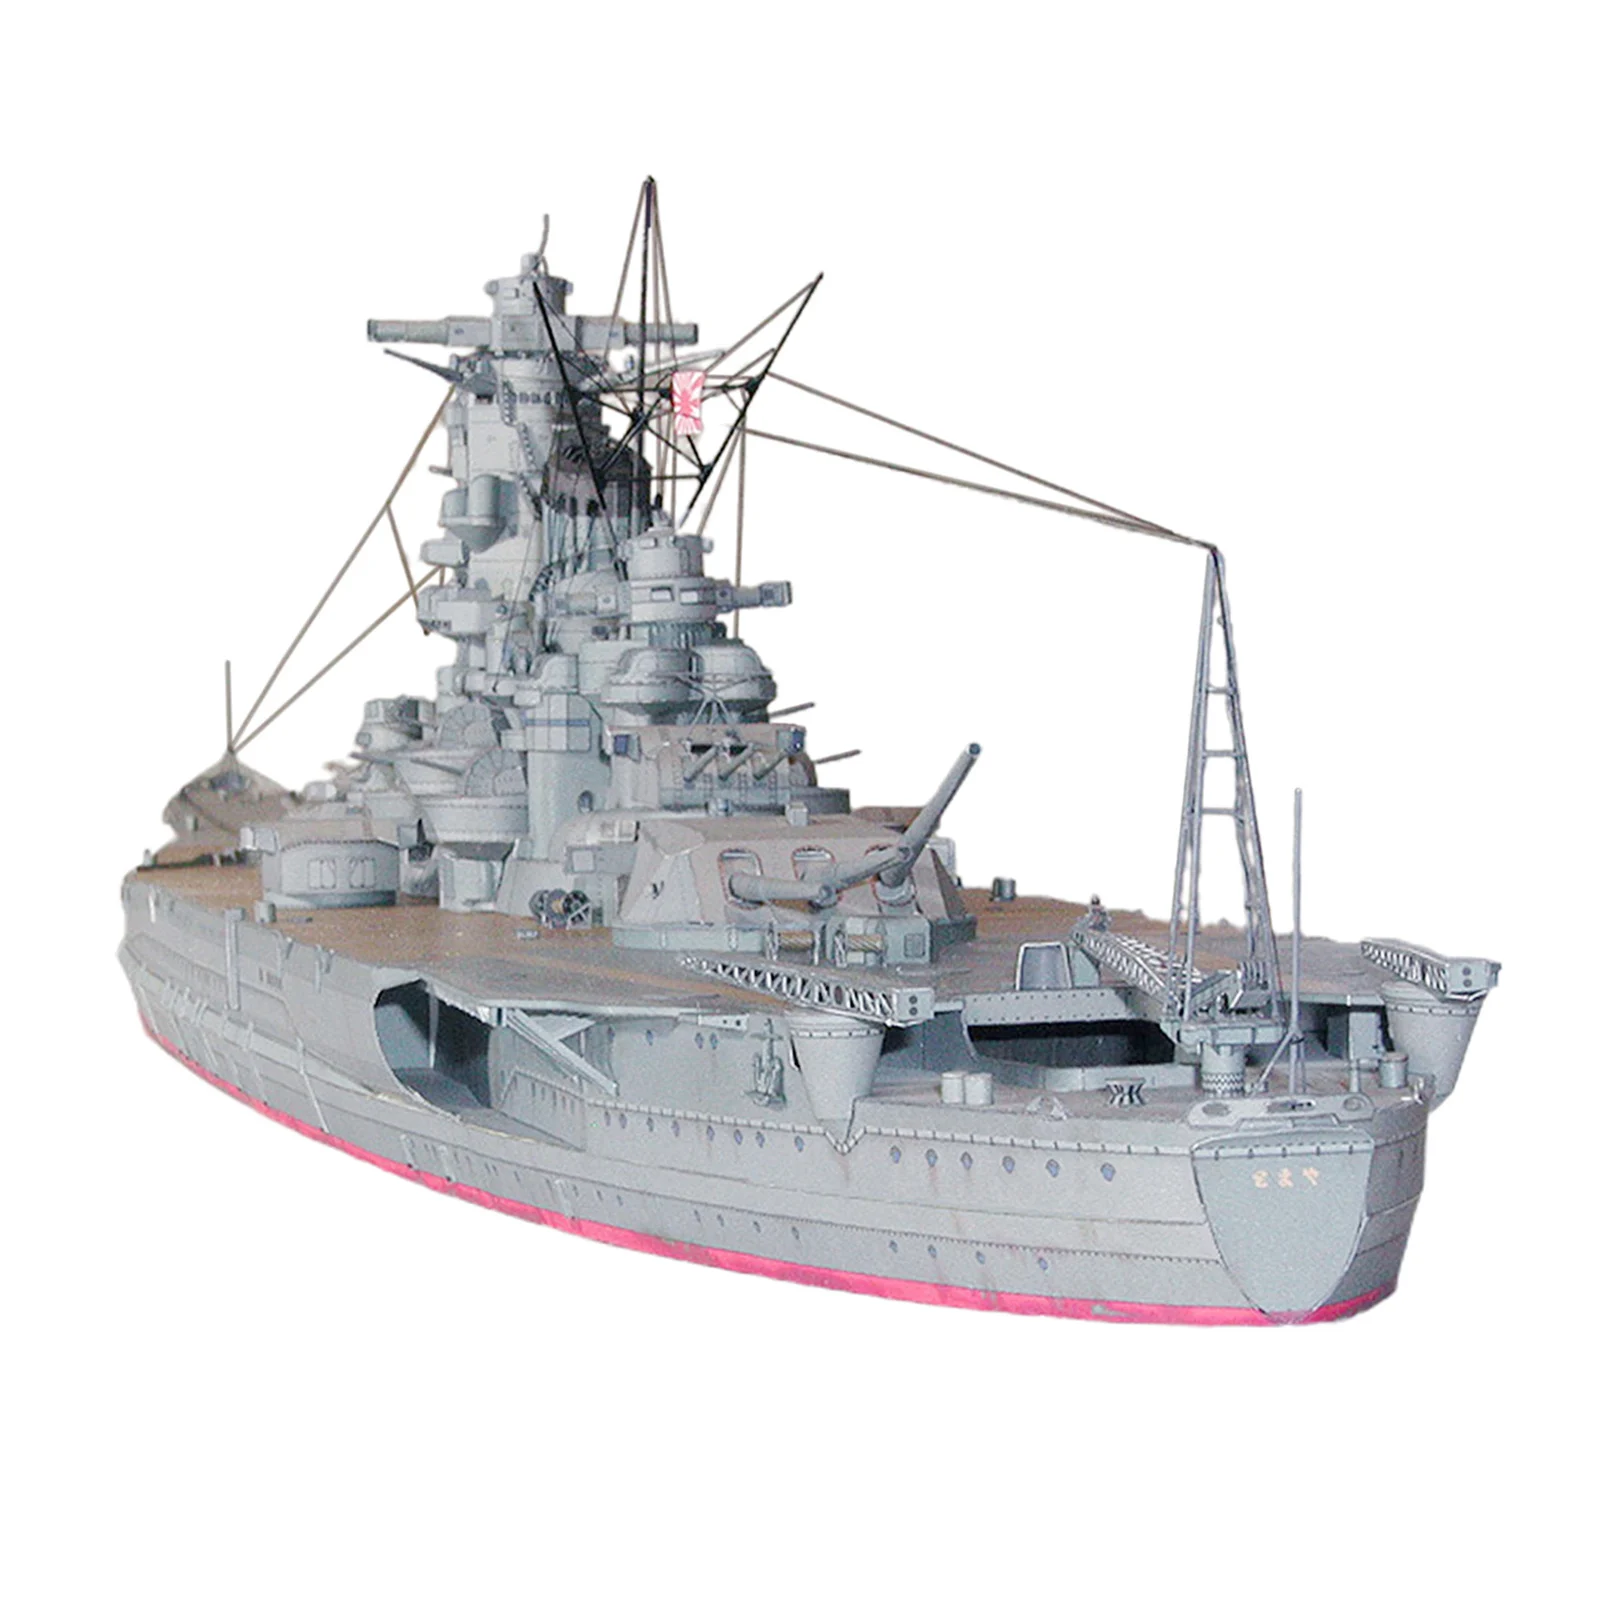 Yamato Navy Ship Puzzle Assemble DIY Paper Model Kits Game Handmade Toy Collection Home Decoration Ornaments